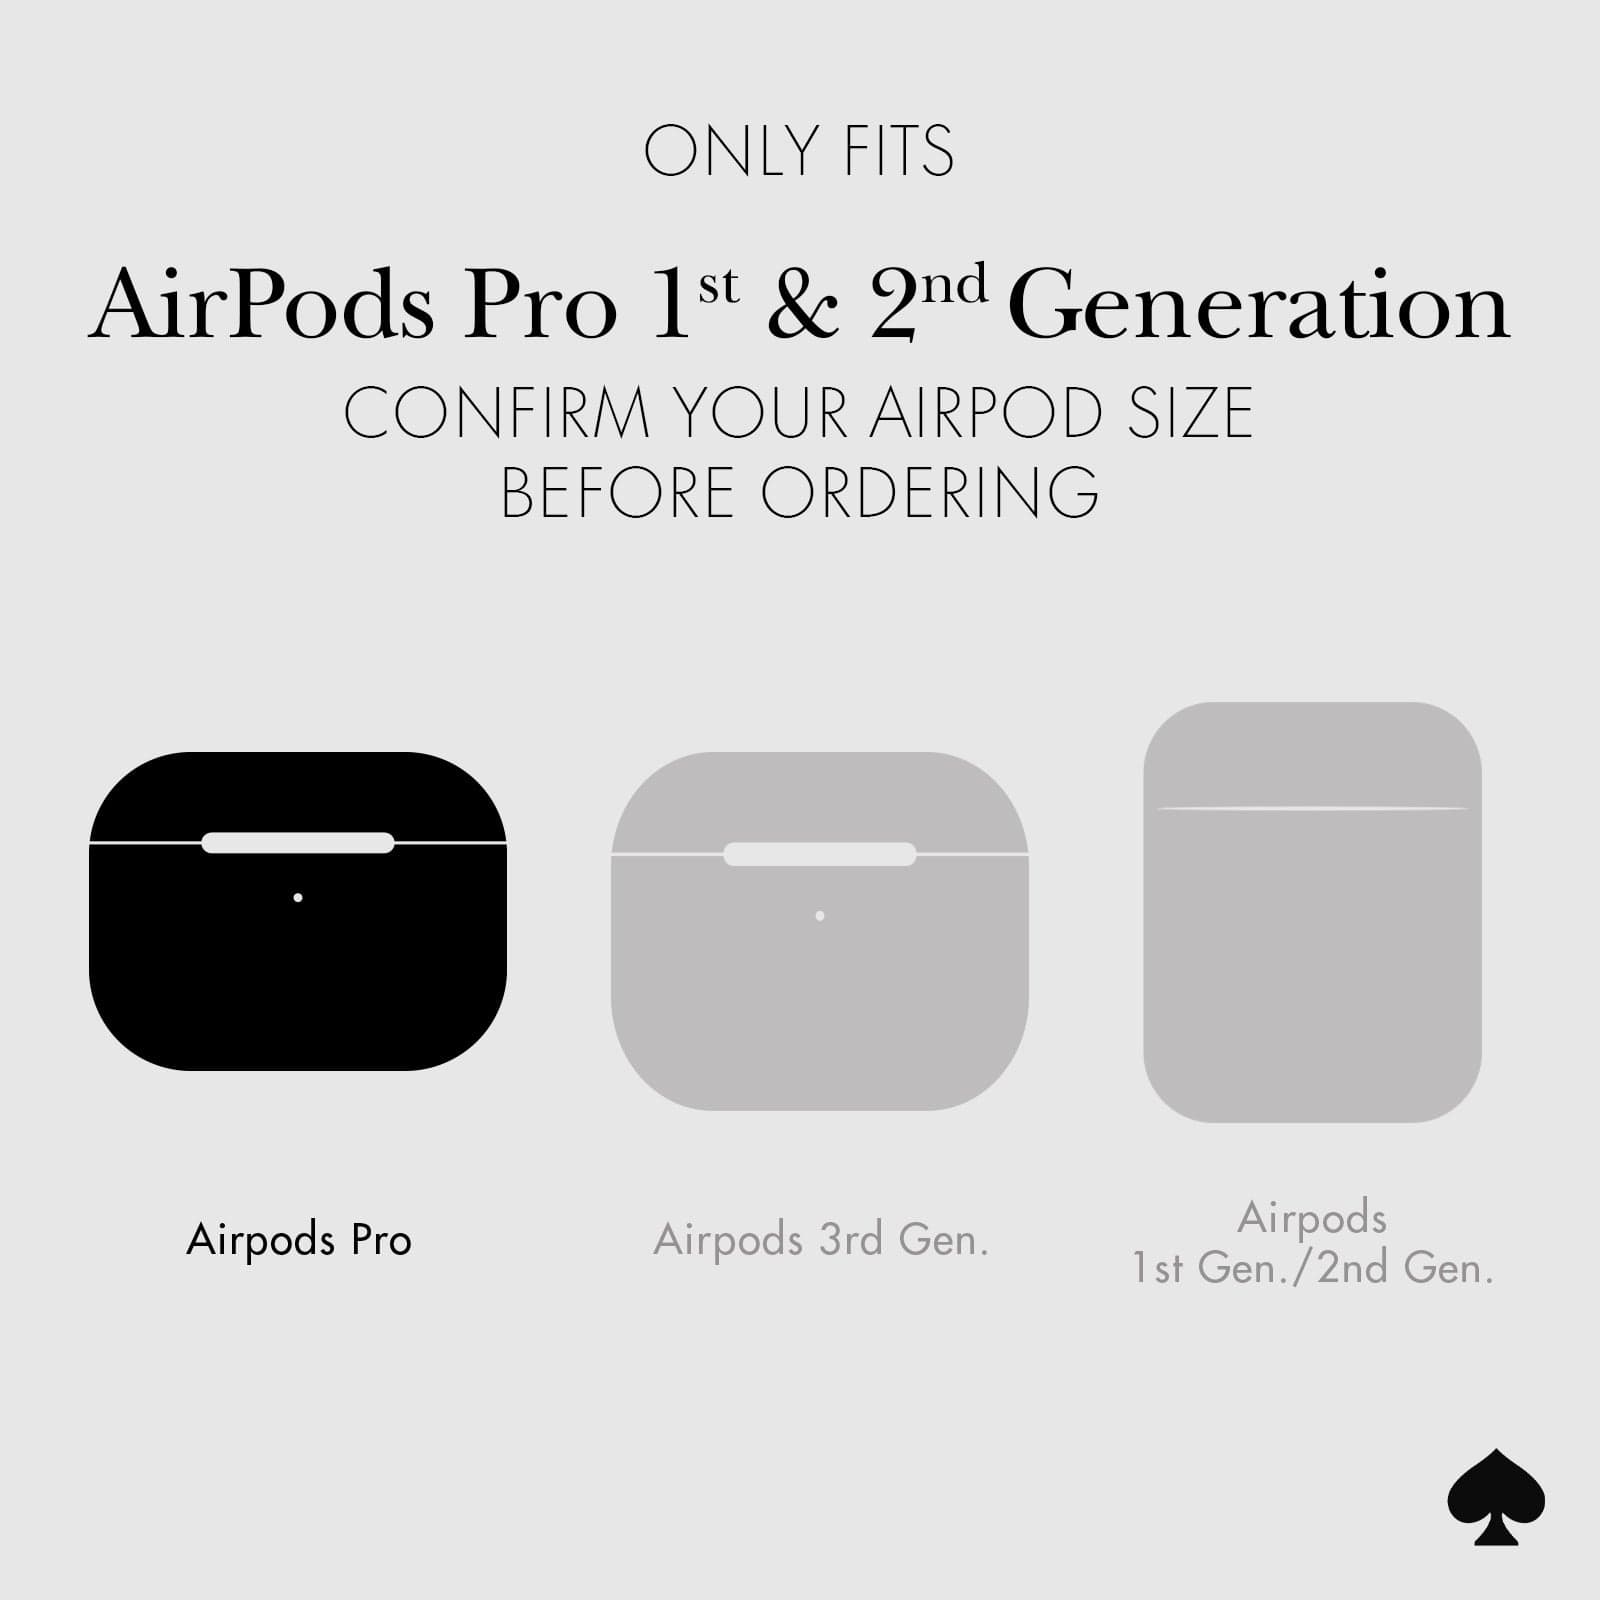 ONLY FITS AIRPODS 1ST AND 2ND GEN. CONFIRM YOUR AIRPOD SIZE BEFORE ORDERING